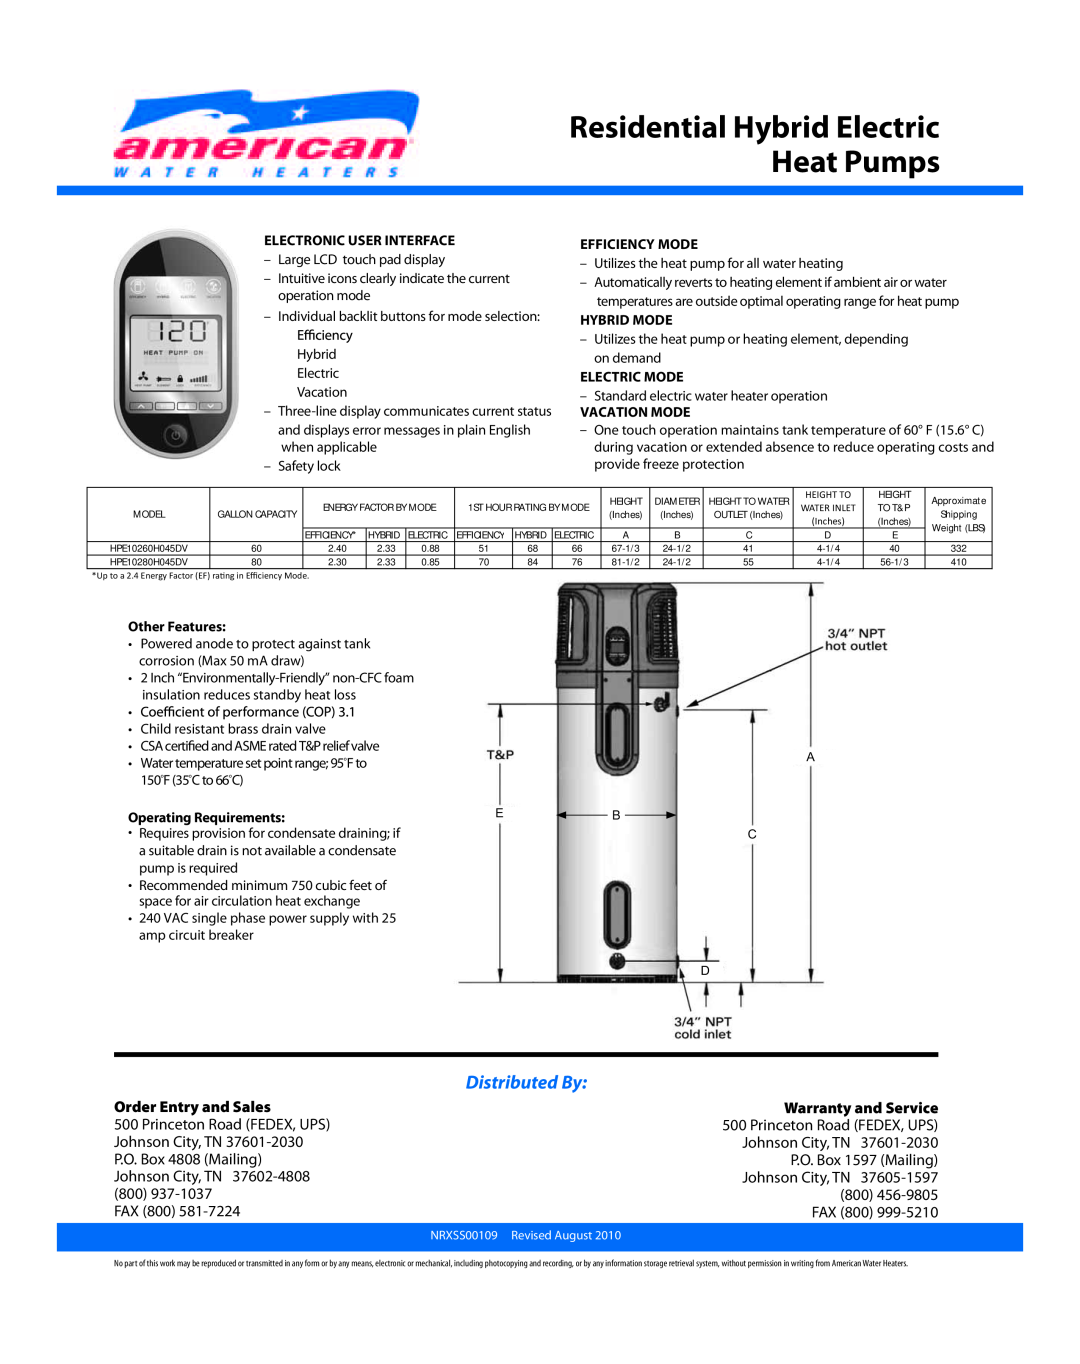 American Water Heater NRXSS00109 Order Entry and Sales, Warranty and Service, Residential Hybrid Electric Heat Pumps 